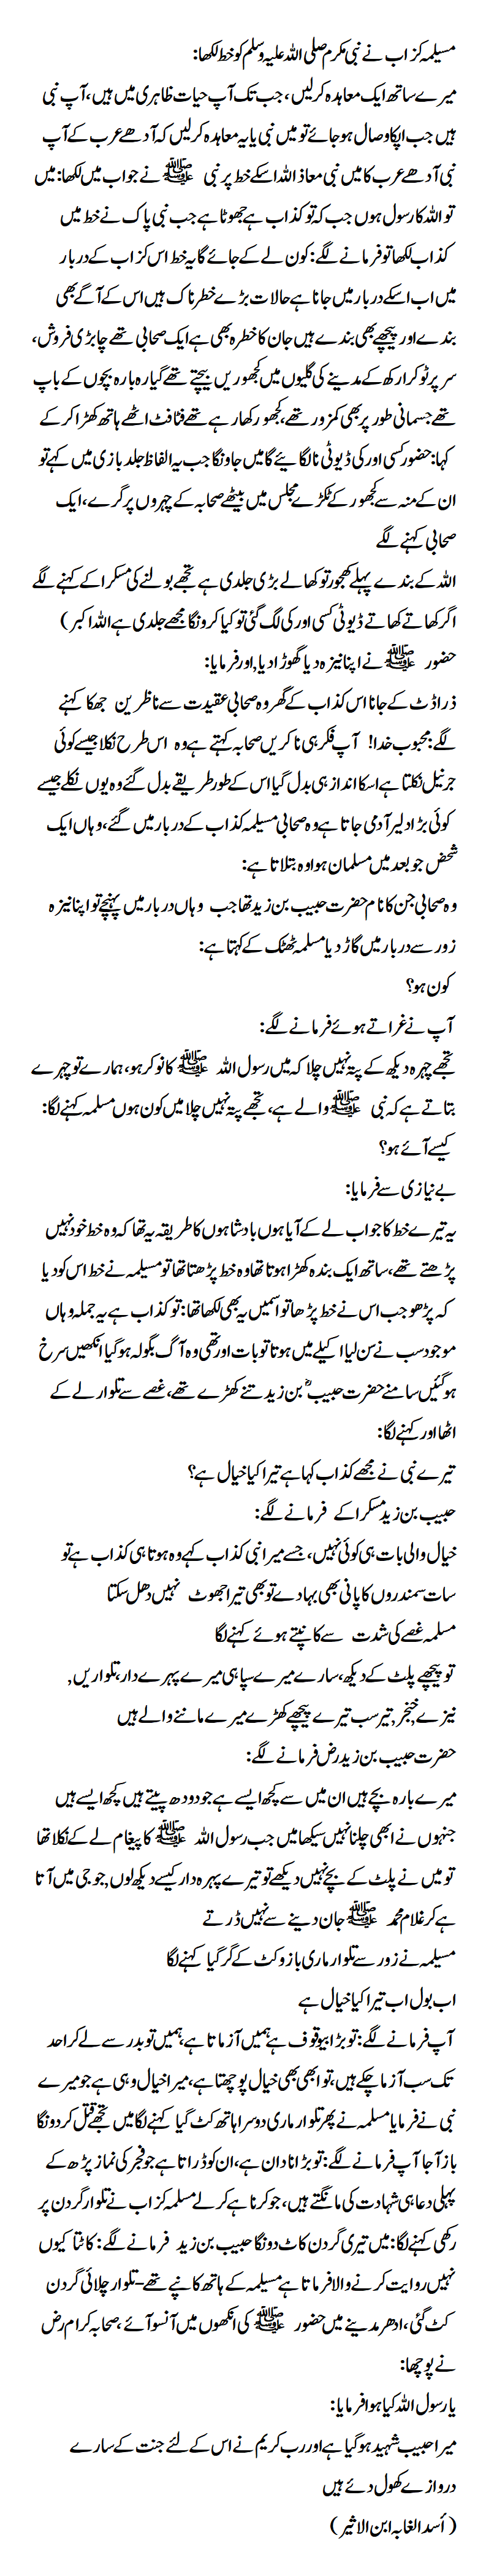 Musailma Qazab wrote a letter to the Holy Prophet